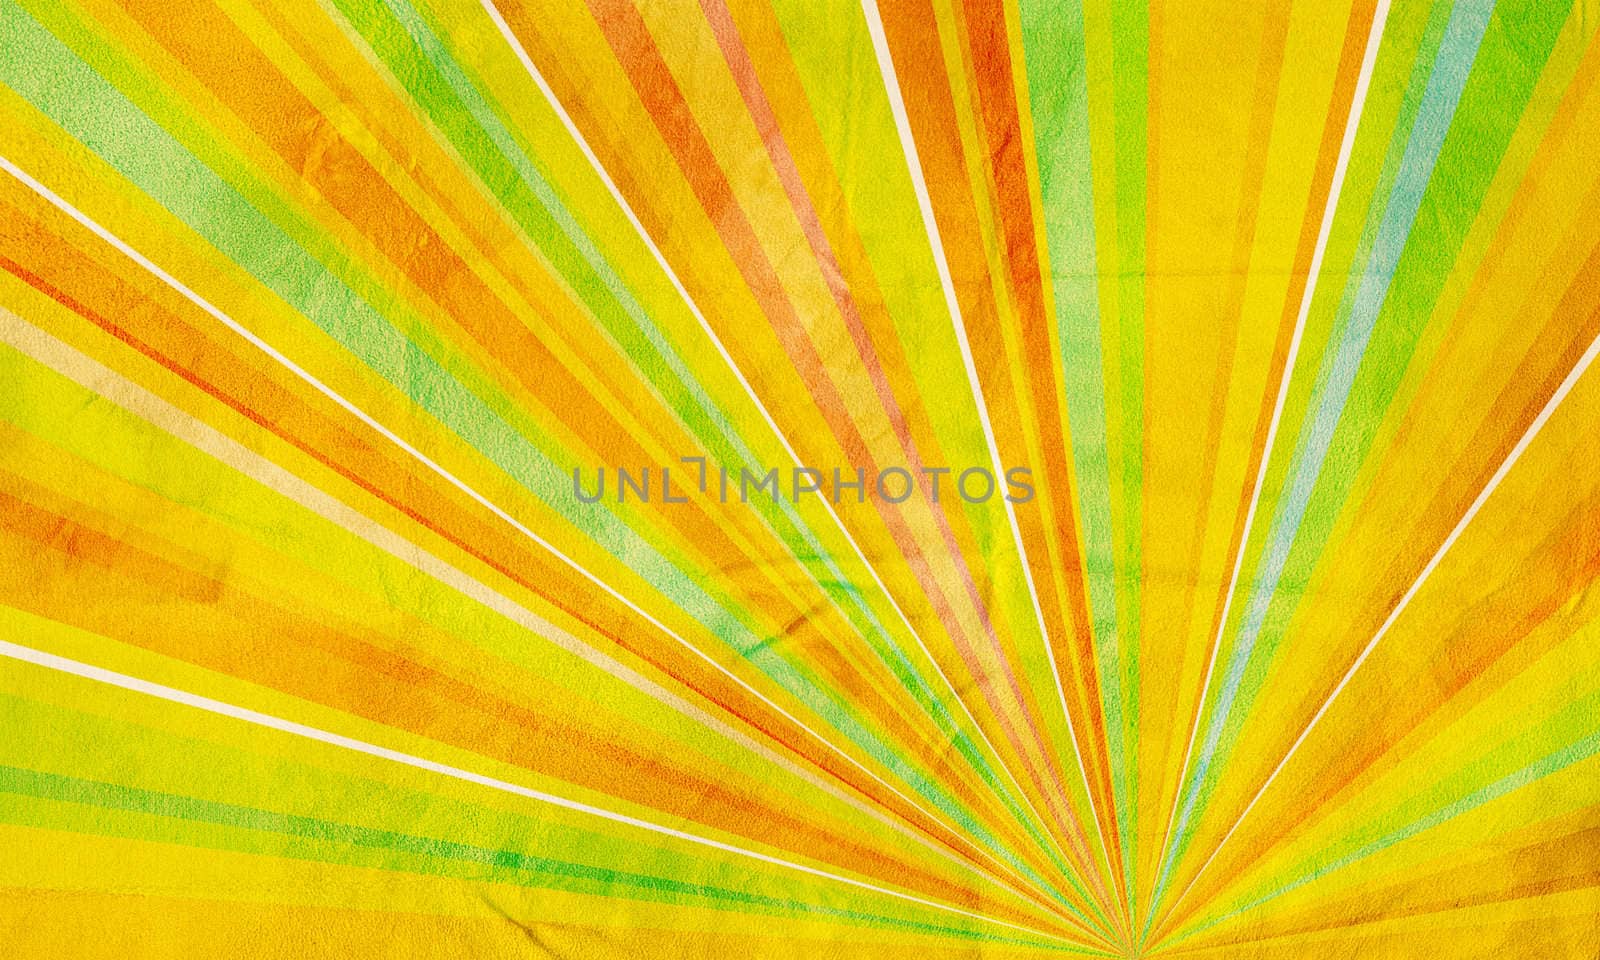 Abstract background with geometric bands of red, yellow, green and red textured